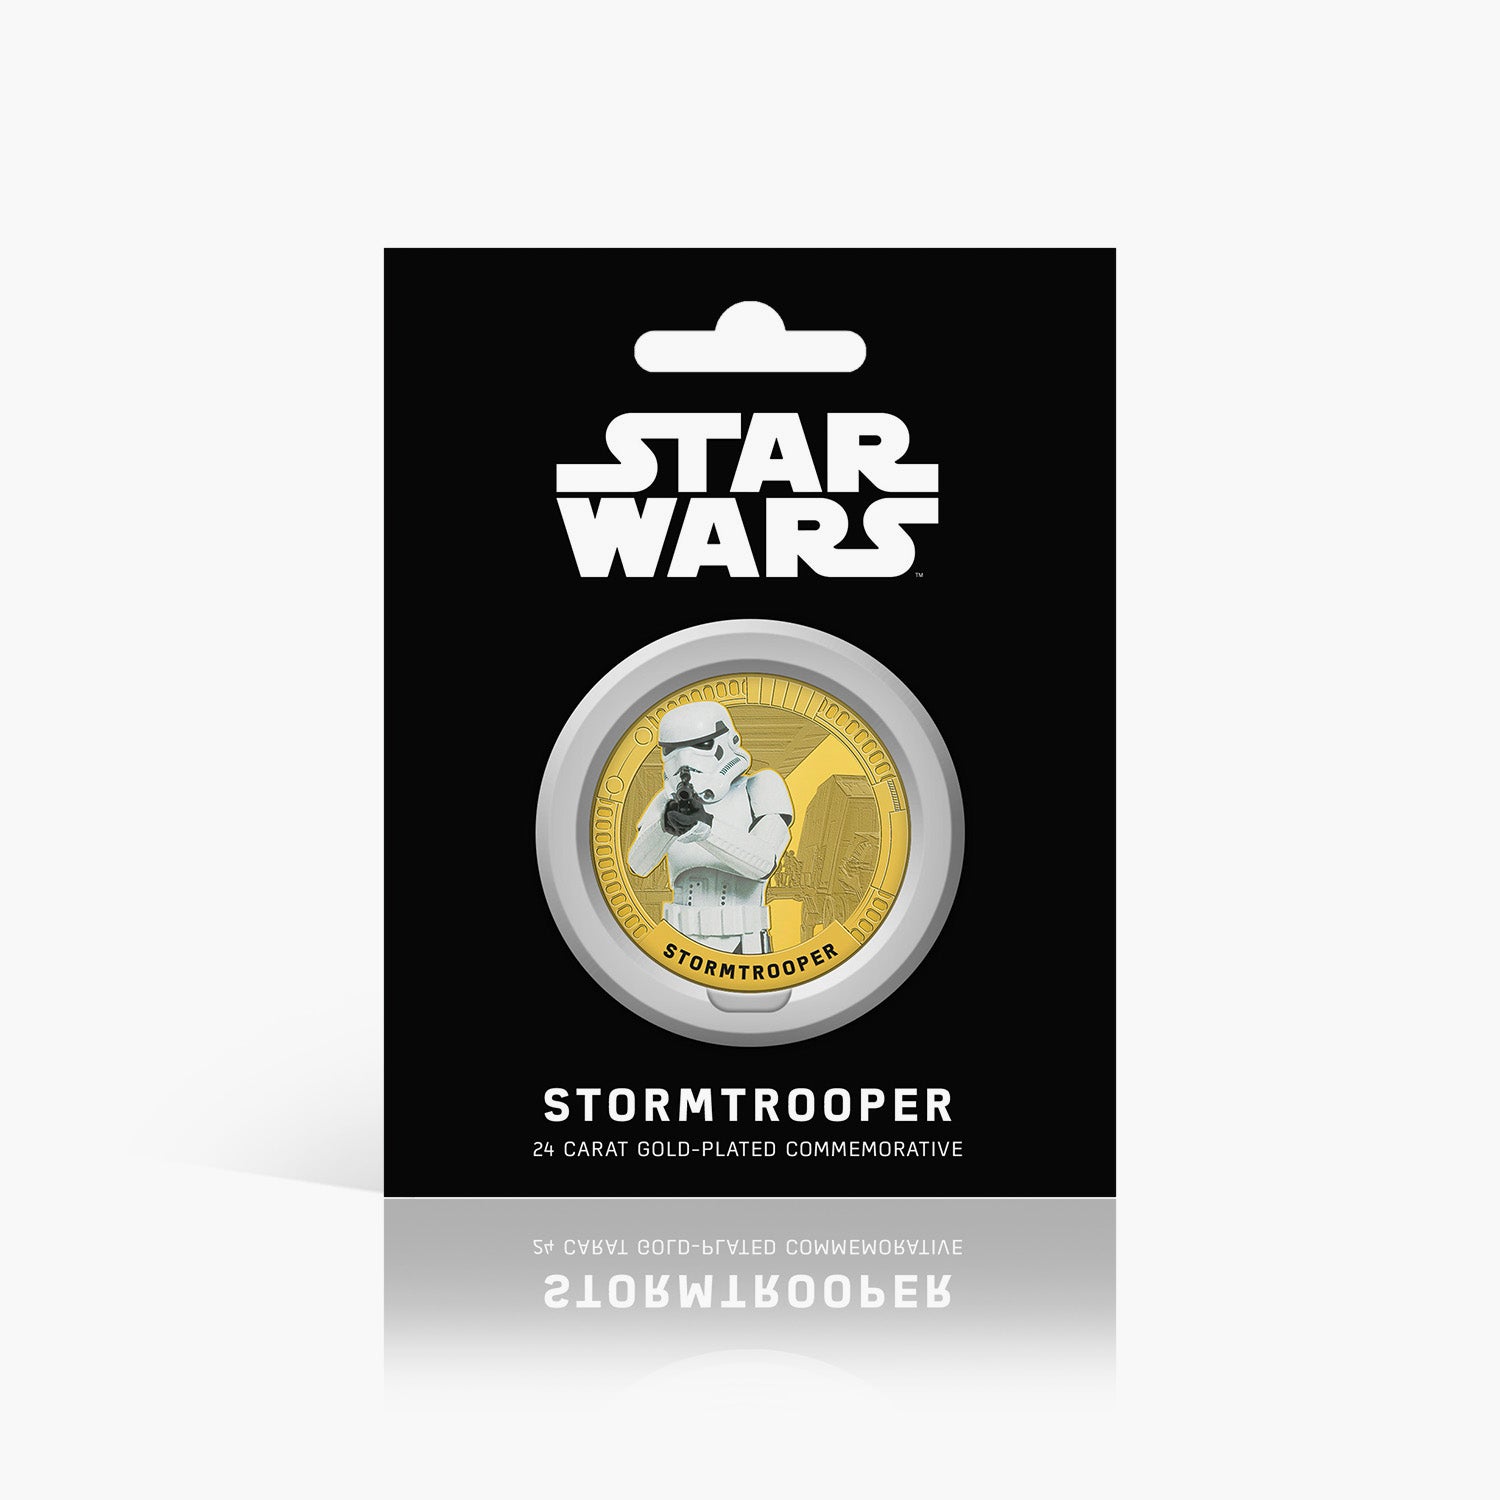 Stormtrooper Gold - Plated Commemorative